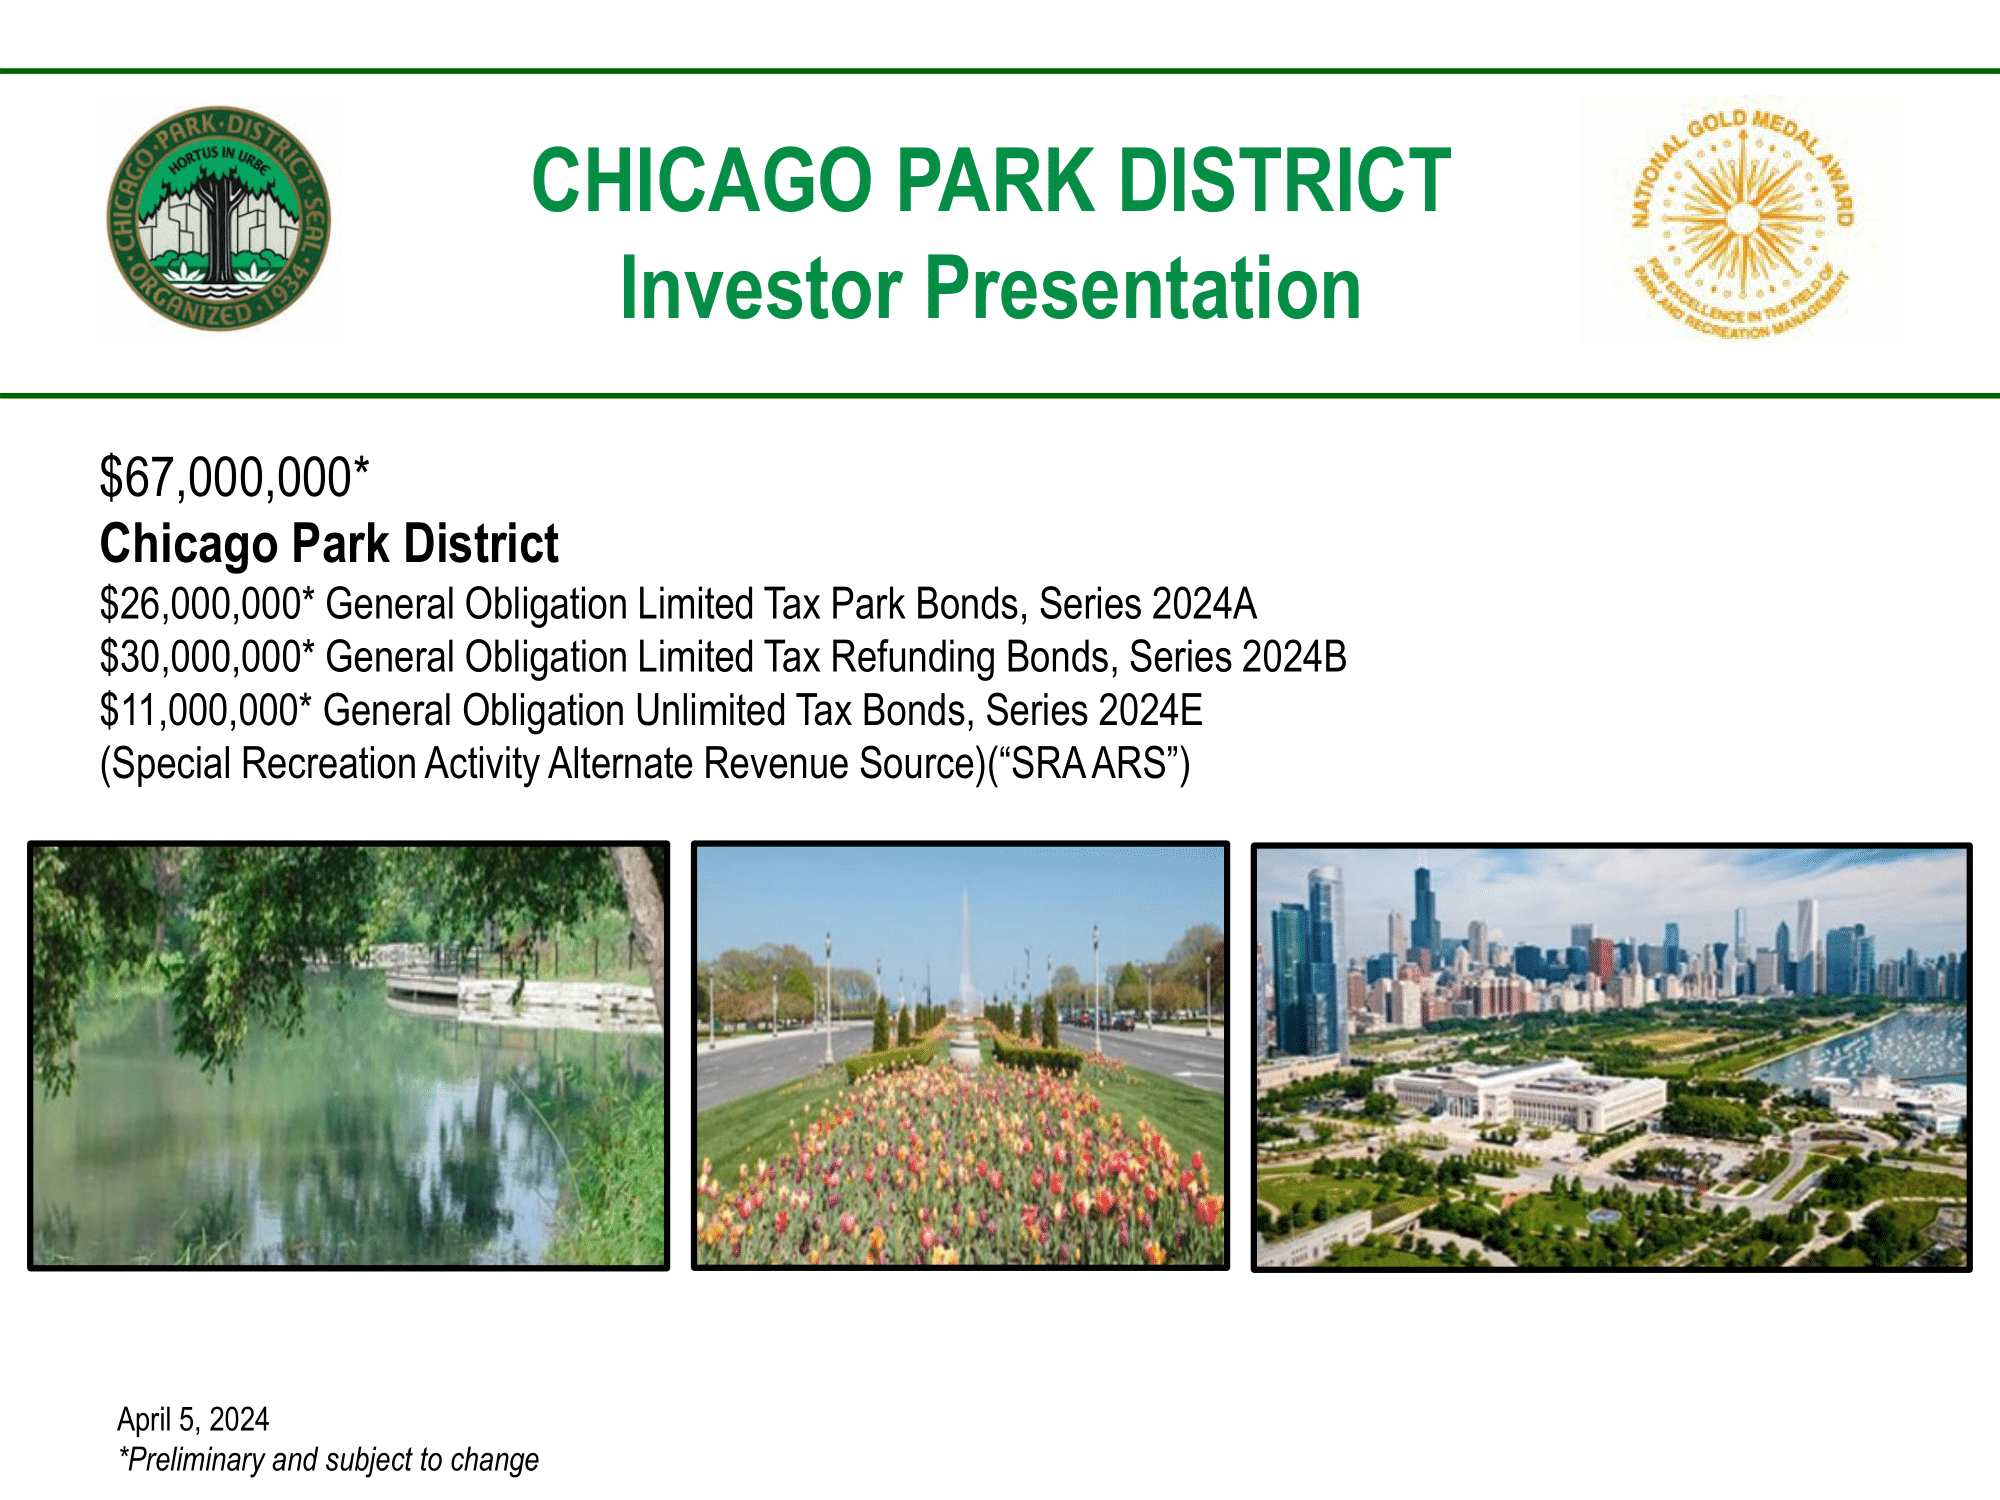 Roadshow for Chicago Park District Investor Relations